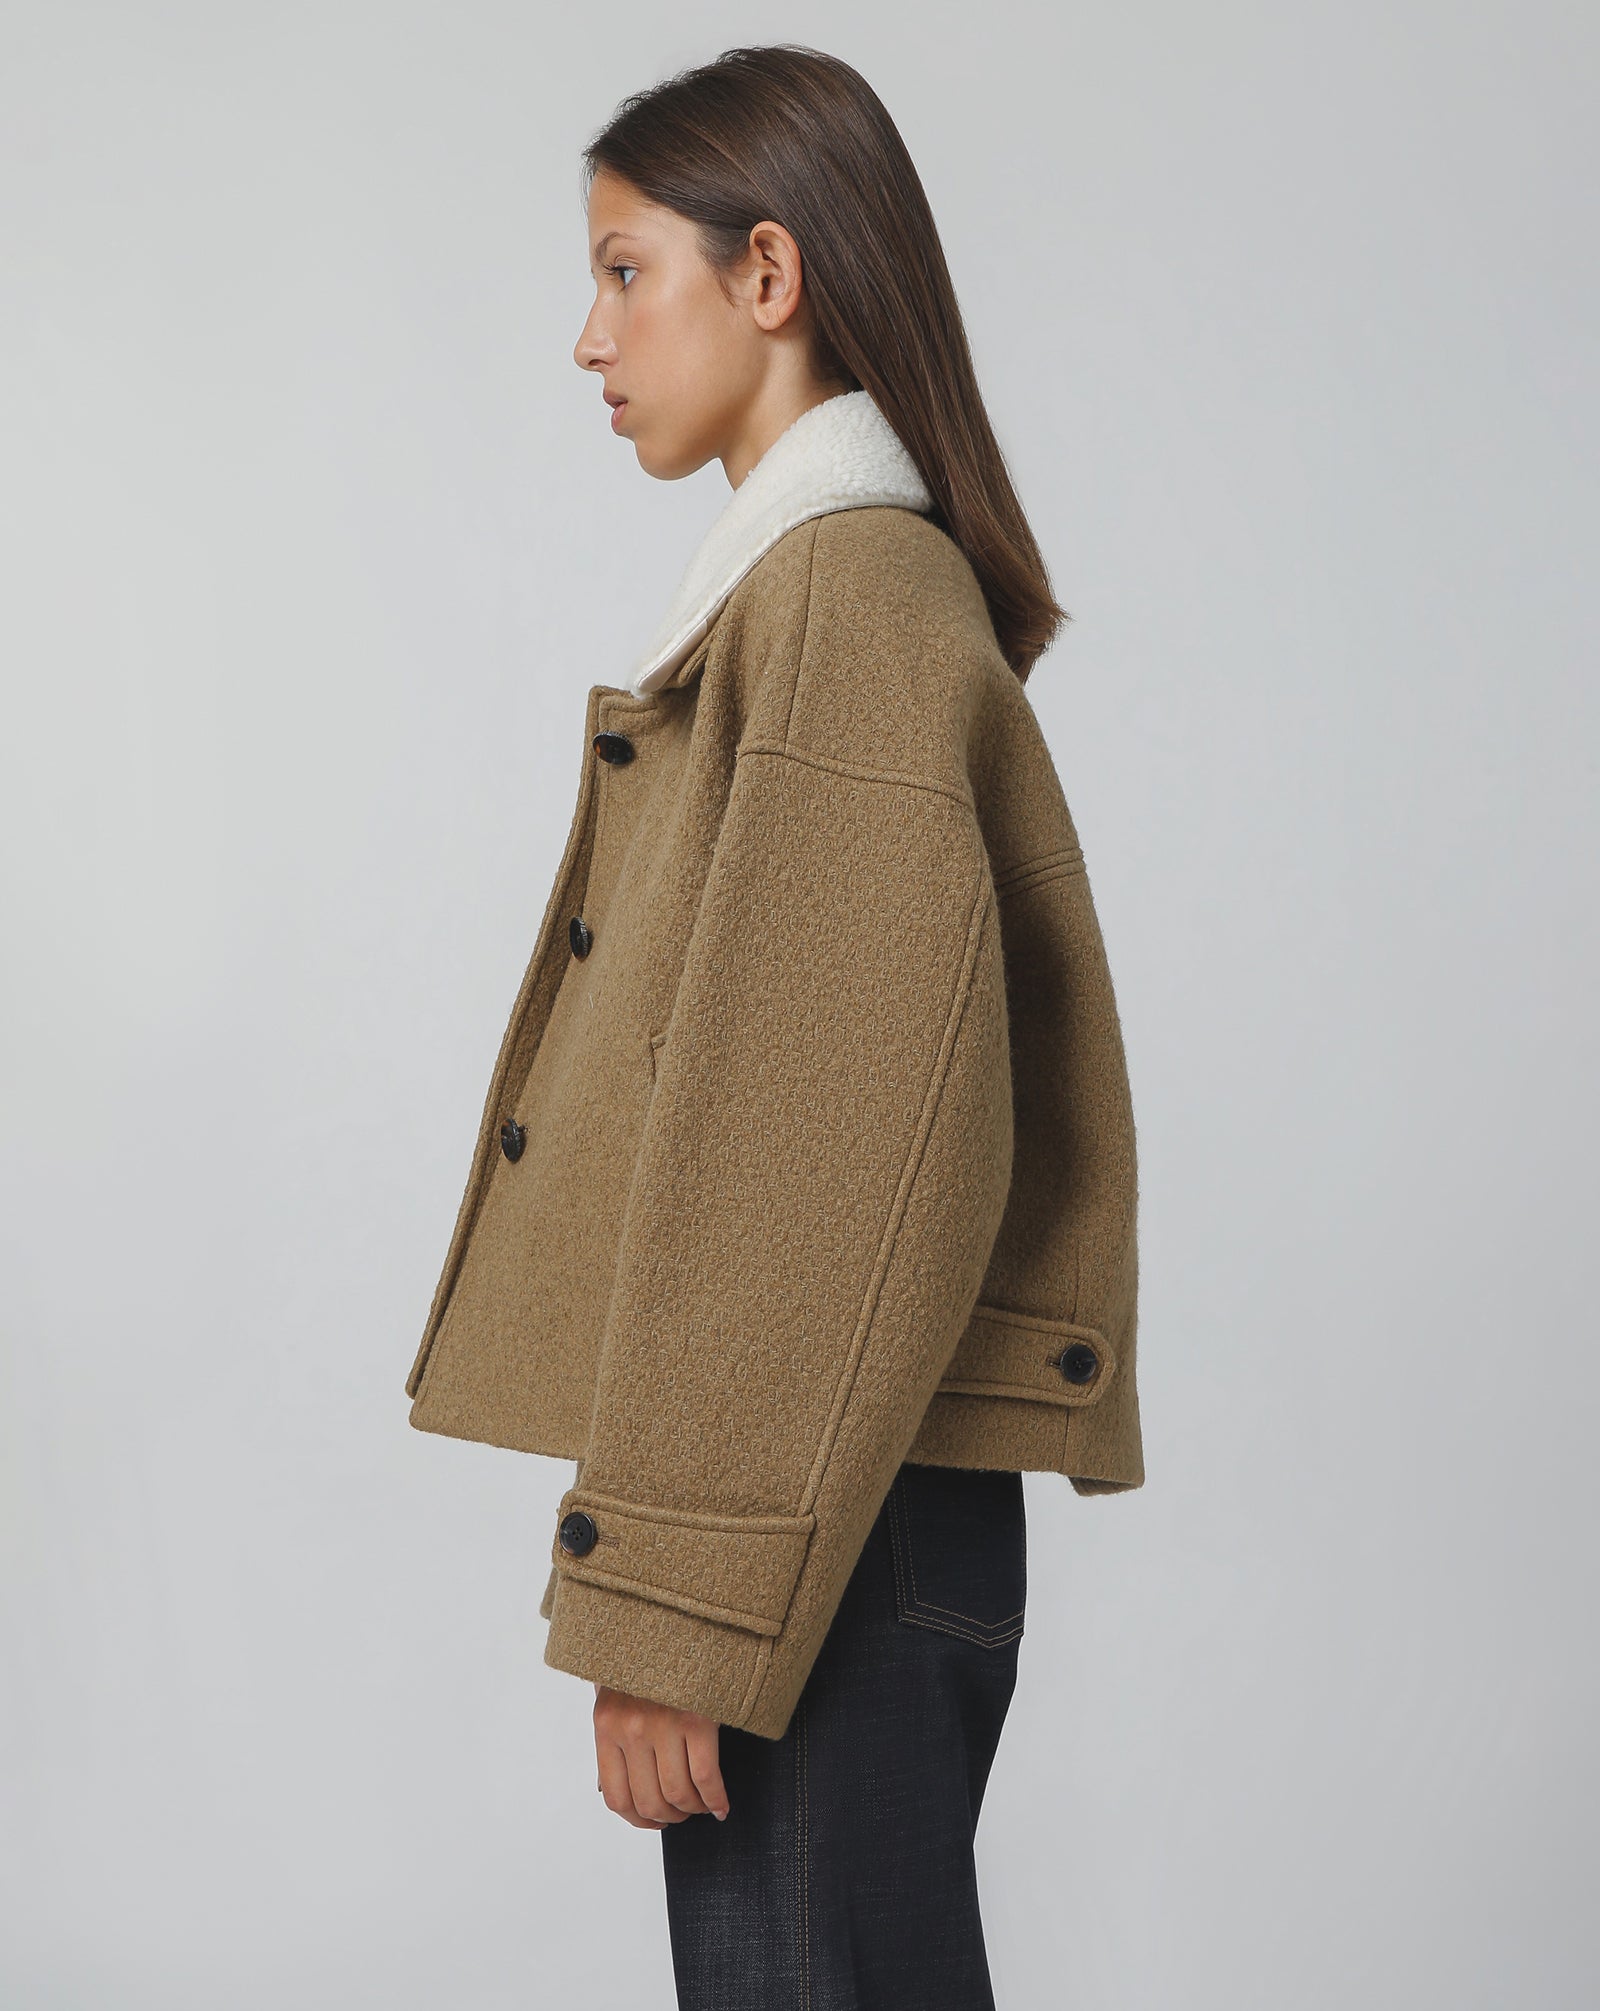 Cropped coat by Raive